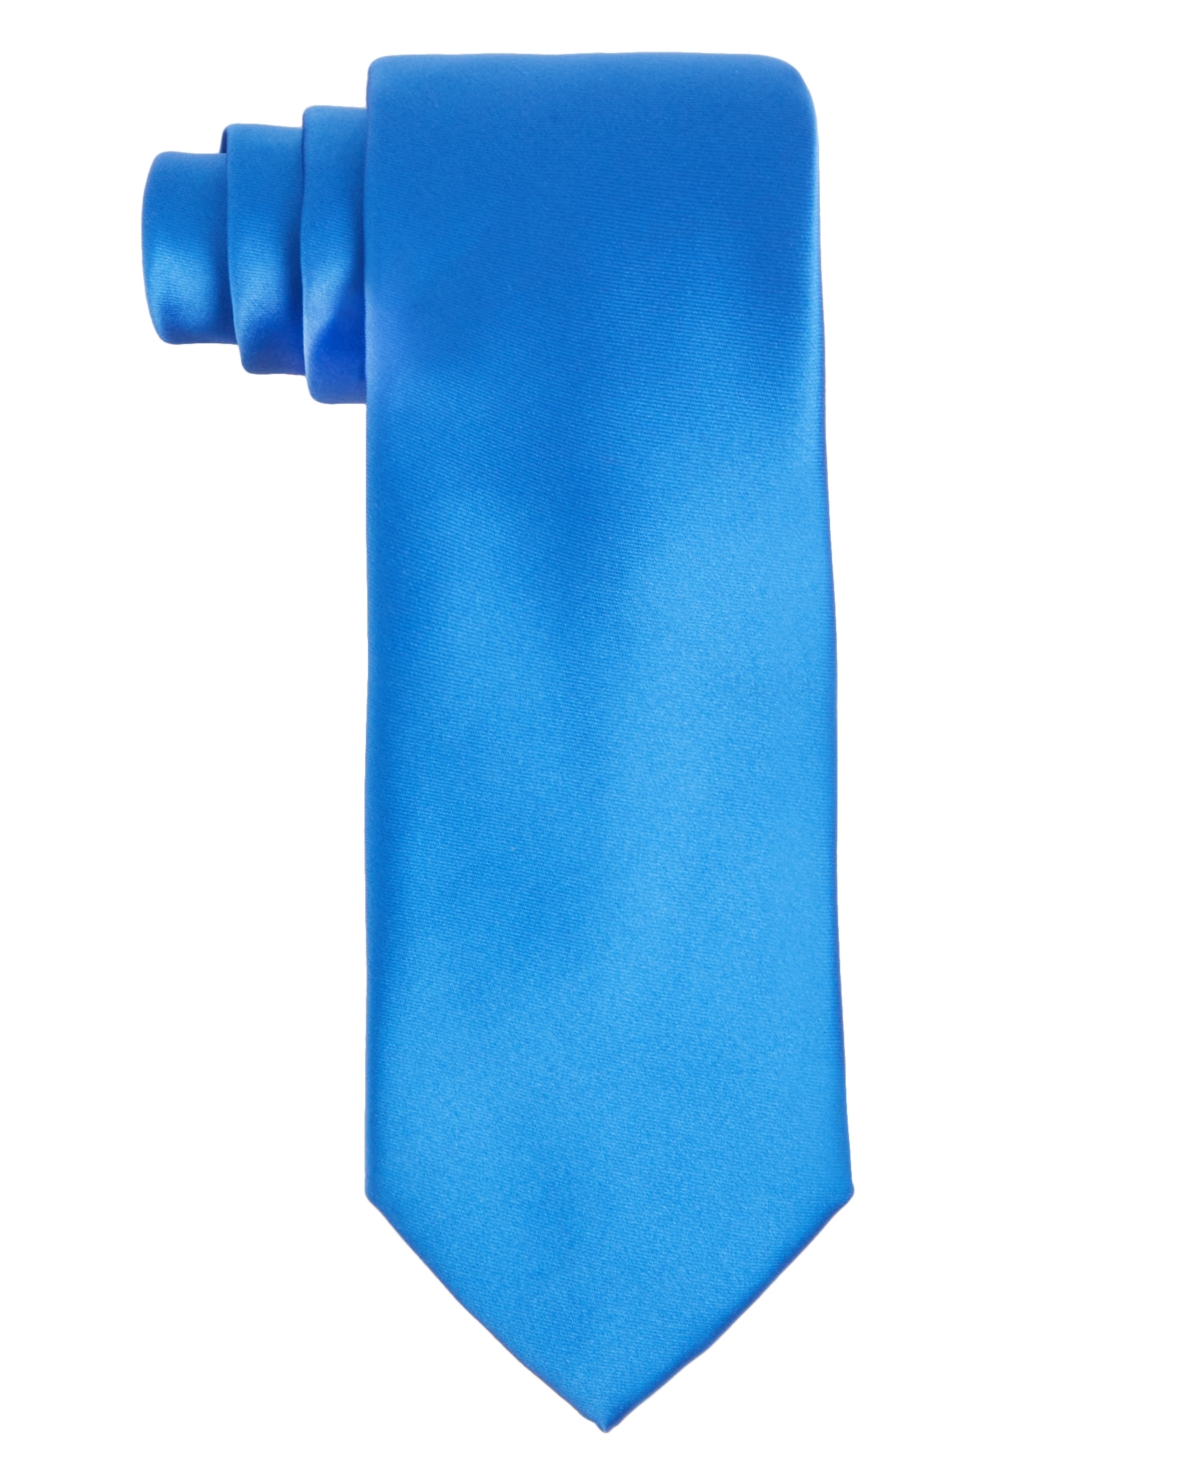 Shop Tayion Collection Men's Royal Blue & White Solid Tie